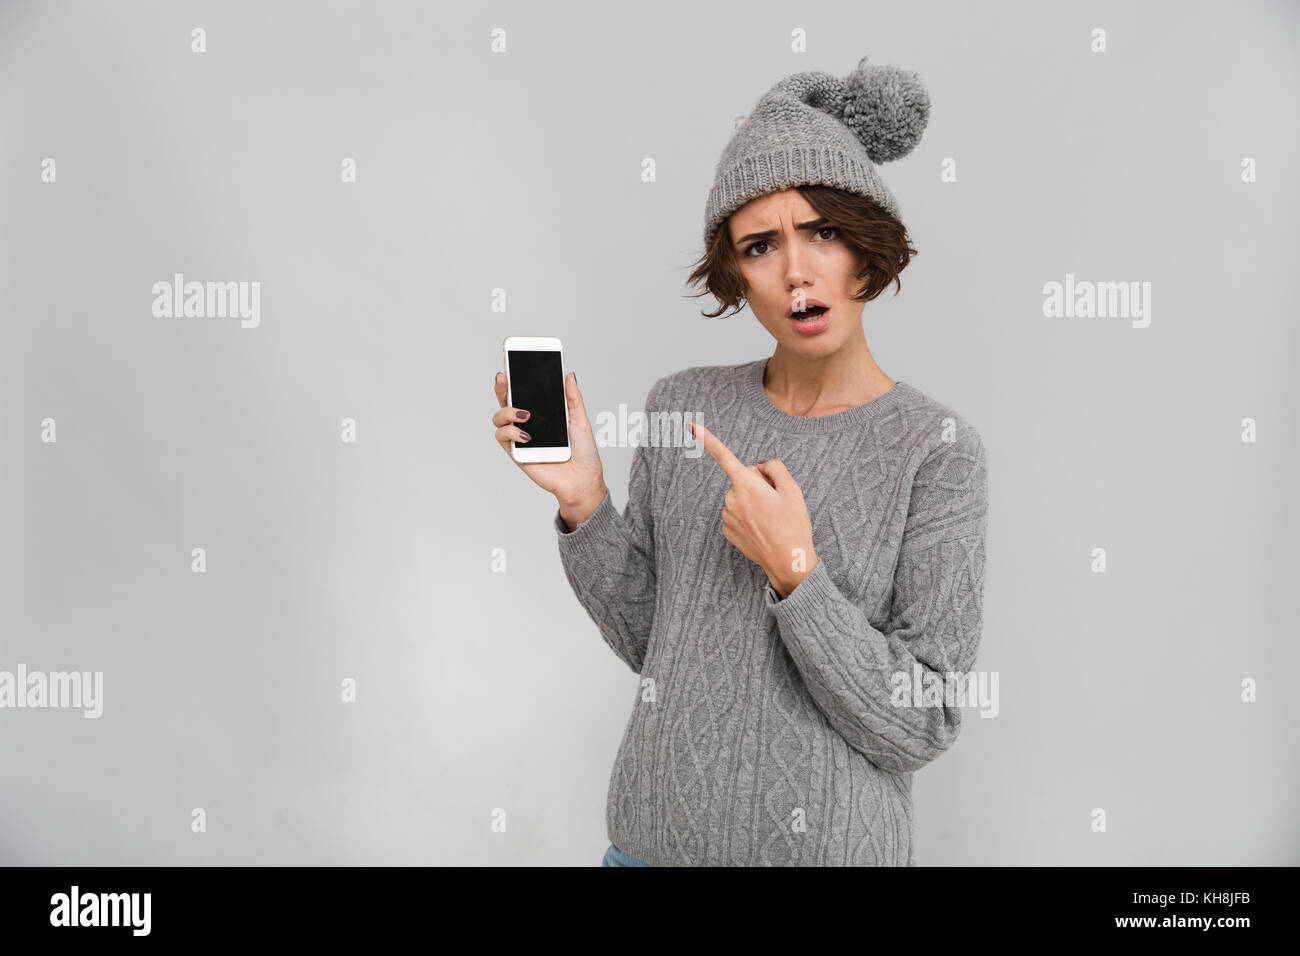 Porttrait of confused young girl in sweater and hat pointing finger at blank screen mobile phone isolated over gray background Stock Photo